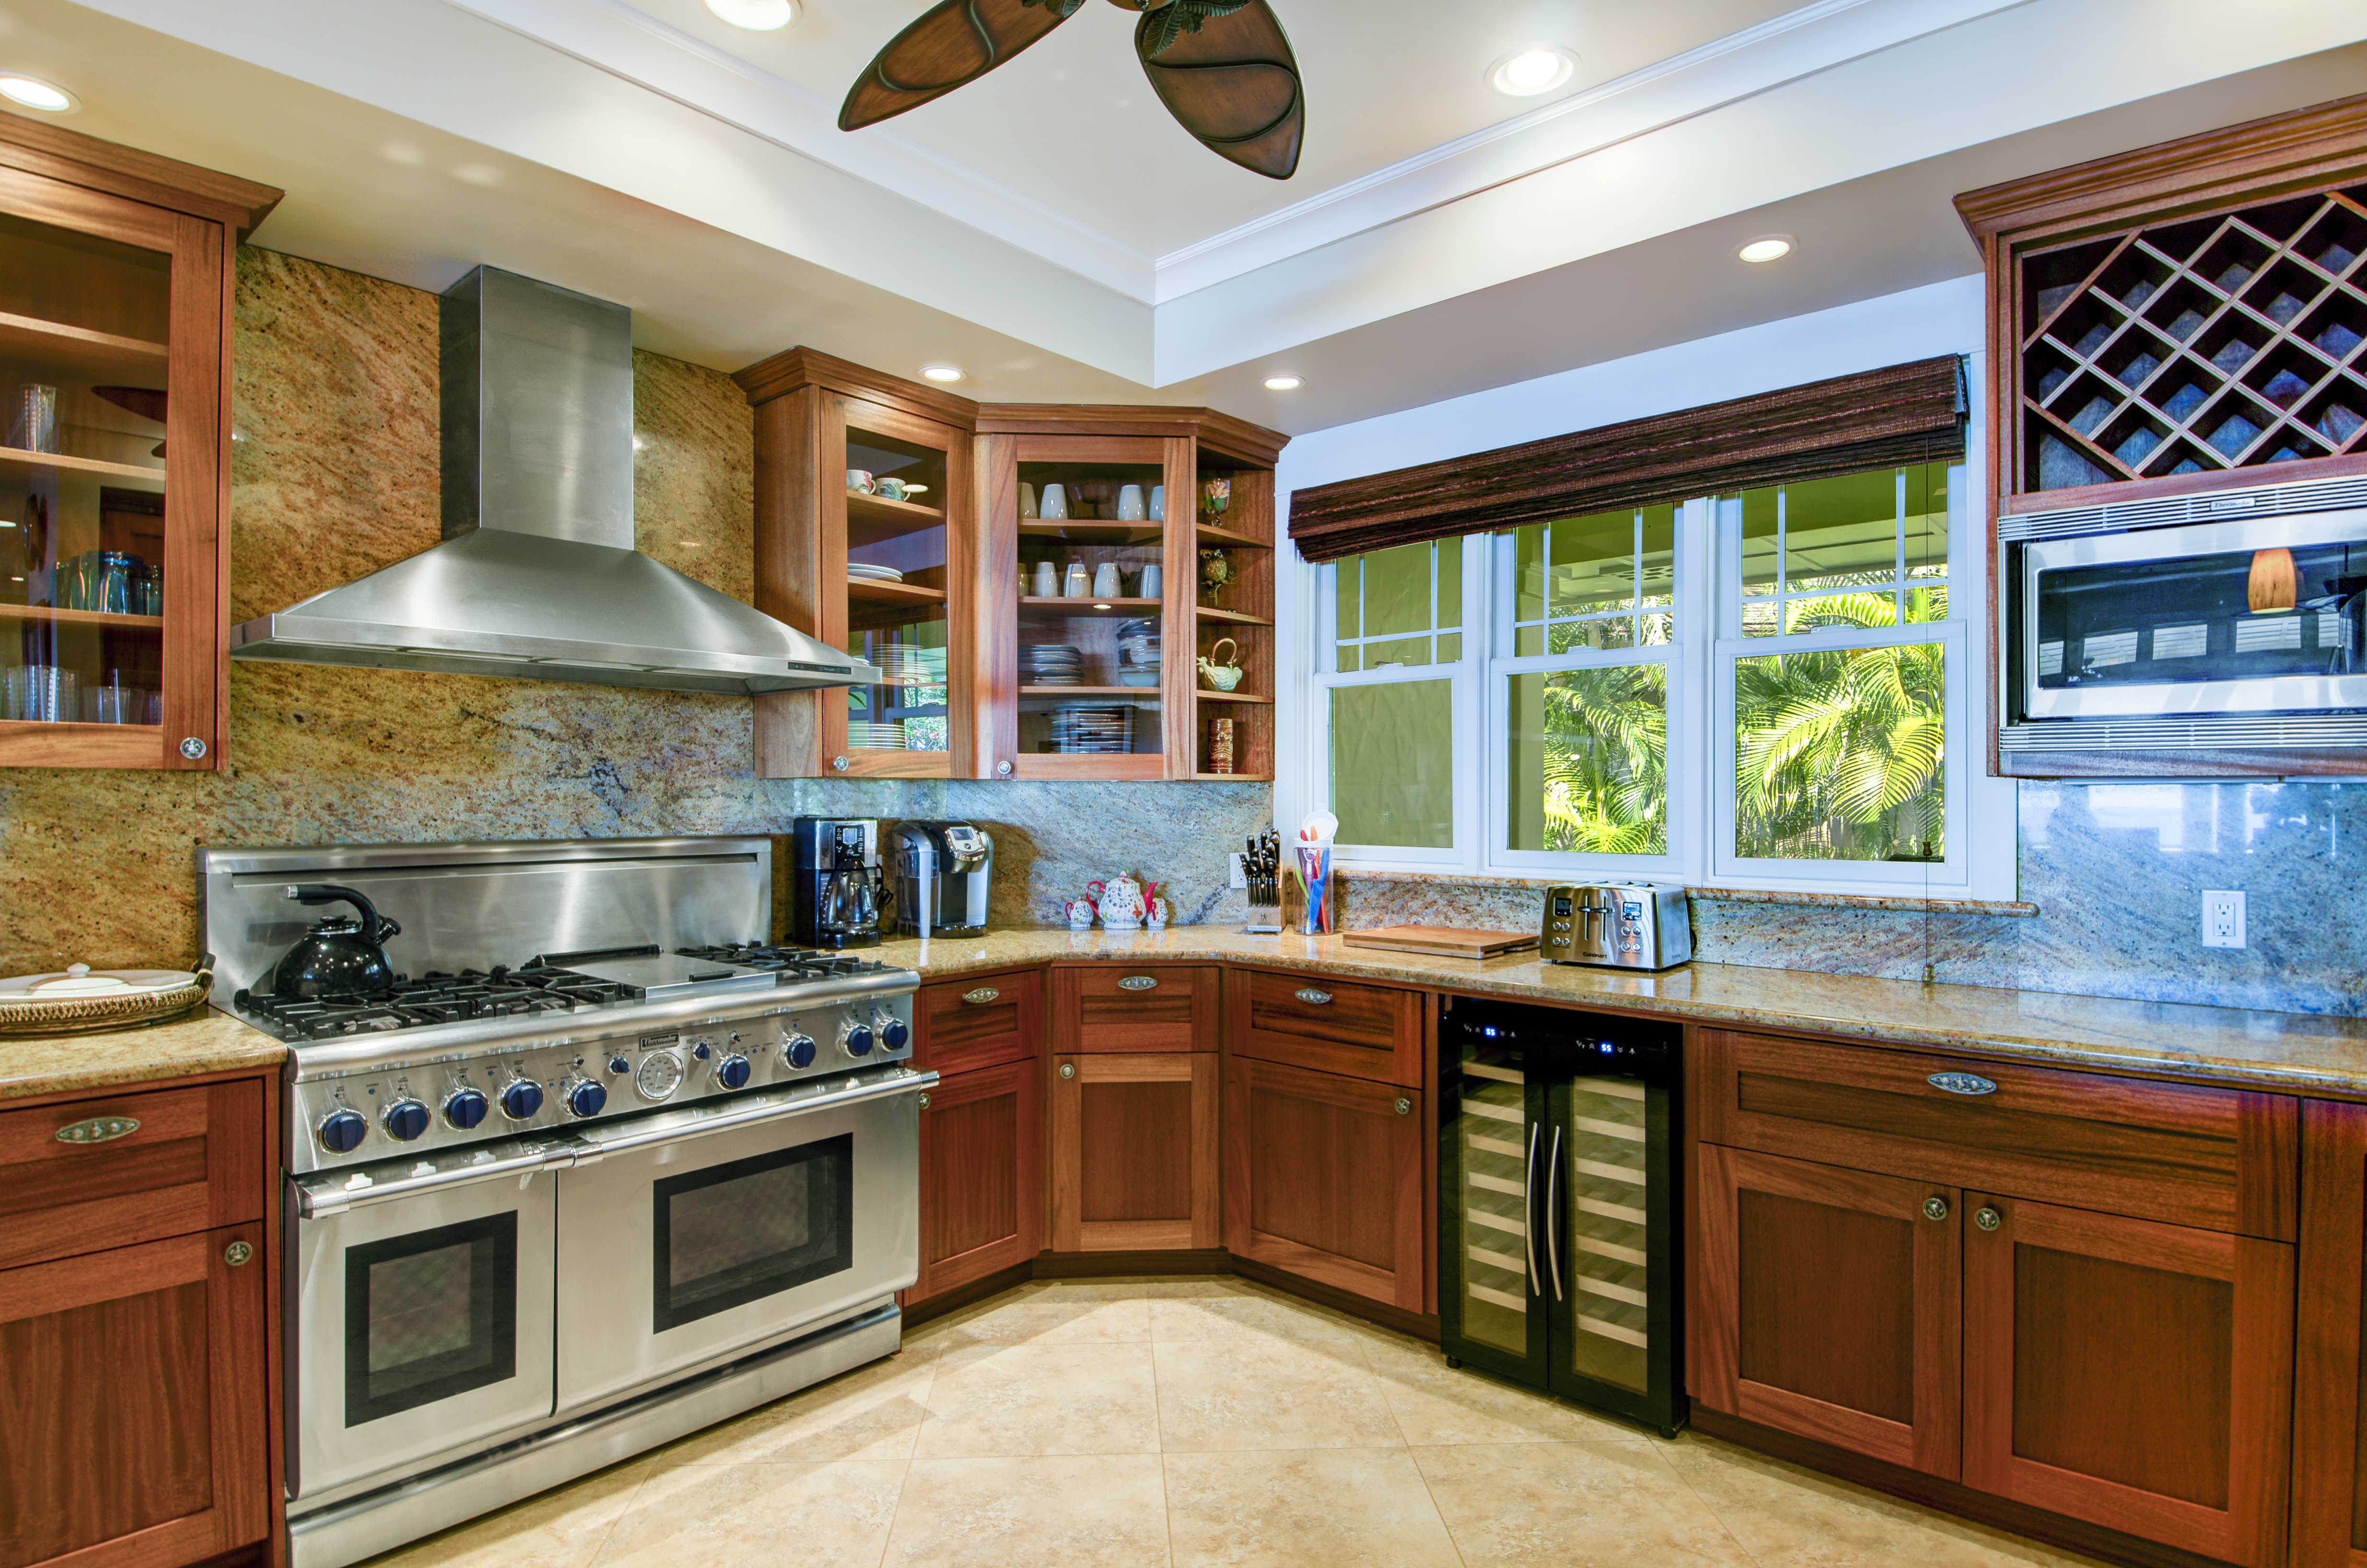 Spacious kitchen and dining area are perfect for entertaining during " dine- in" evenings.